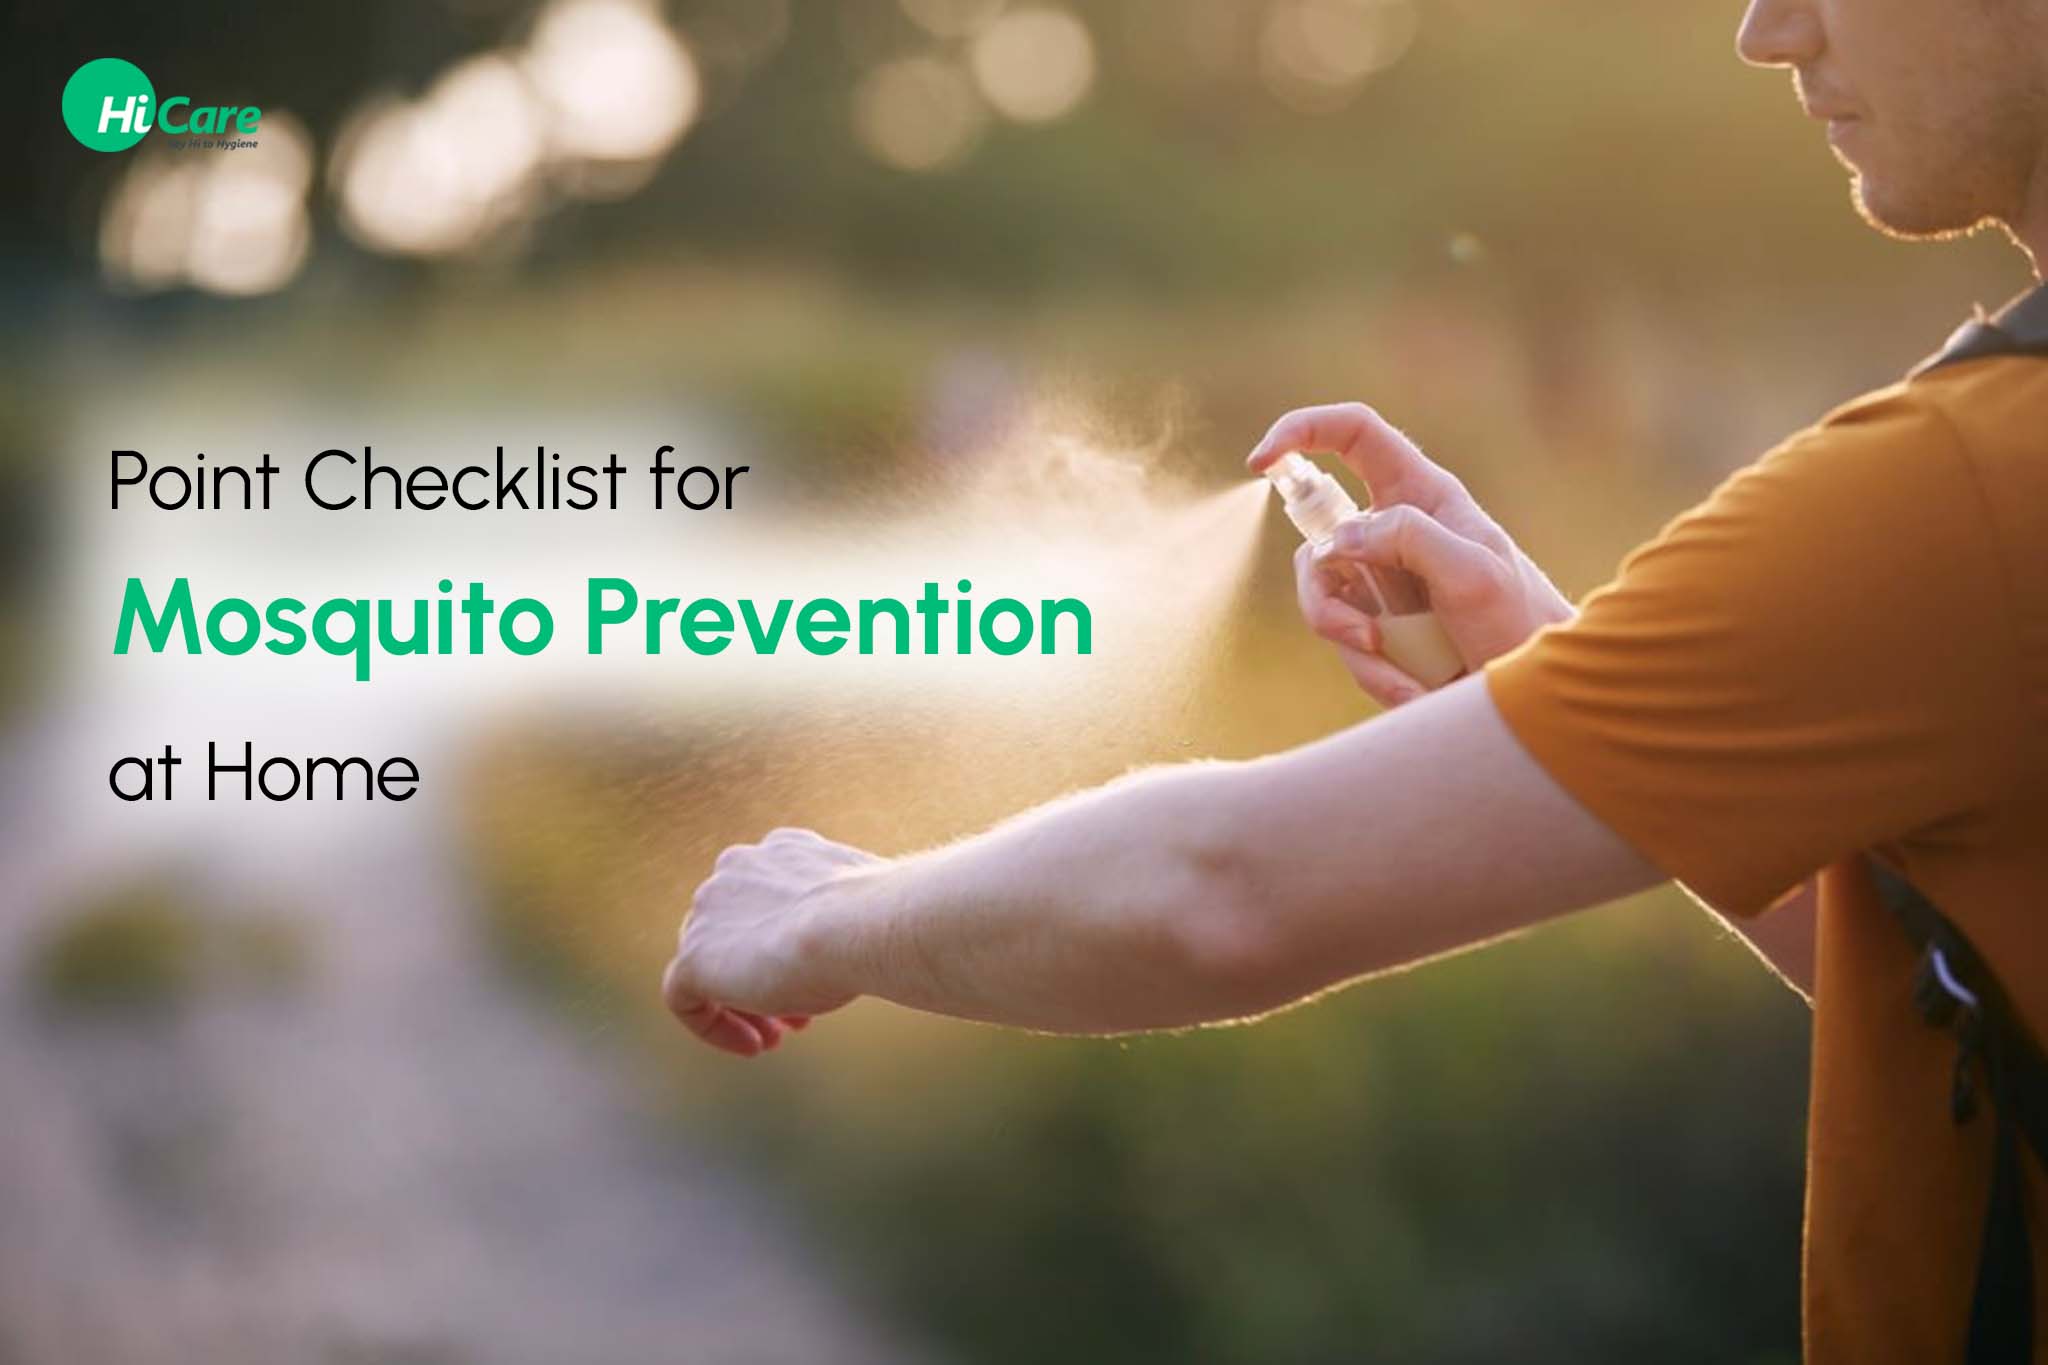 7-Point Checklist for Mosquito Prevention at Home